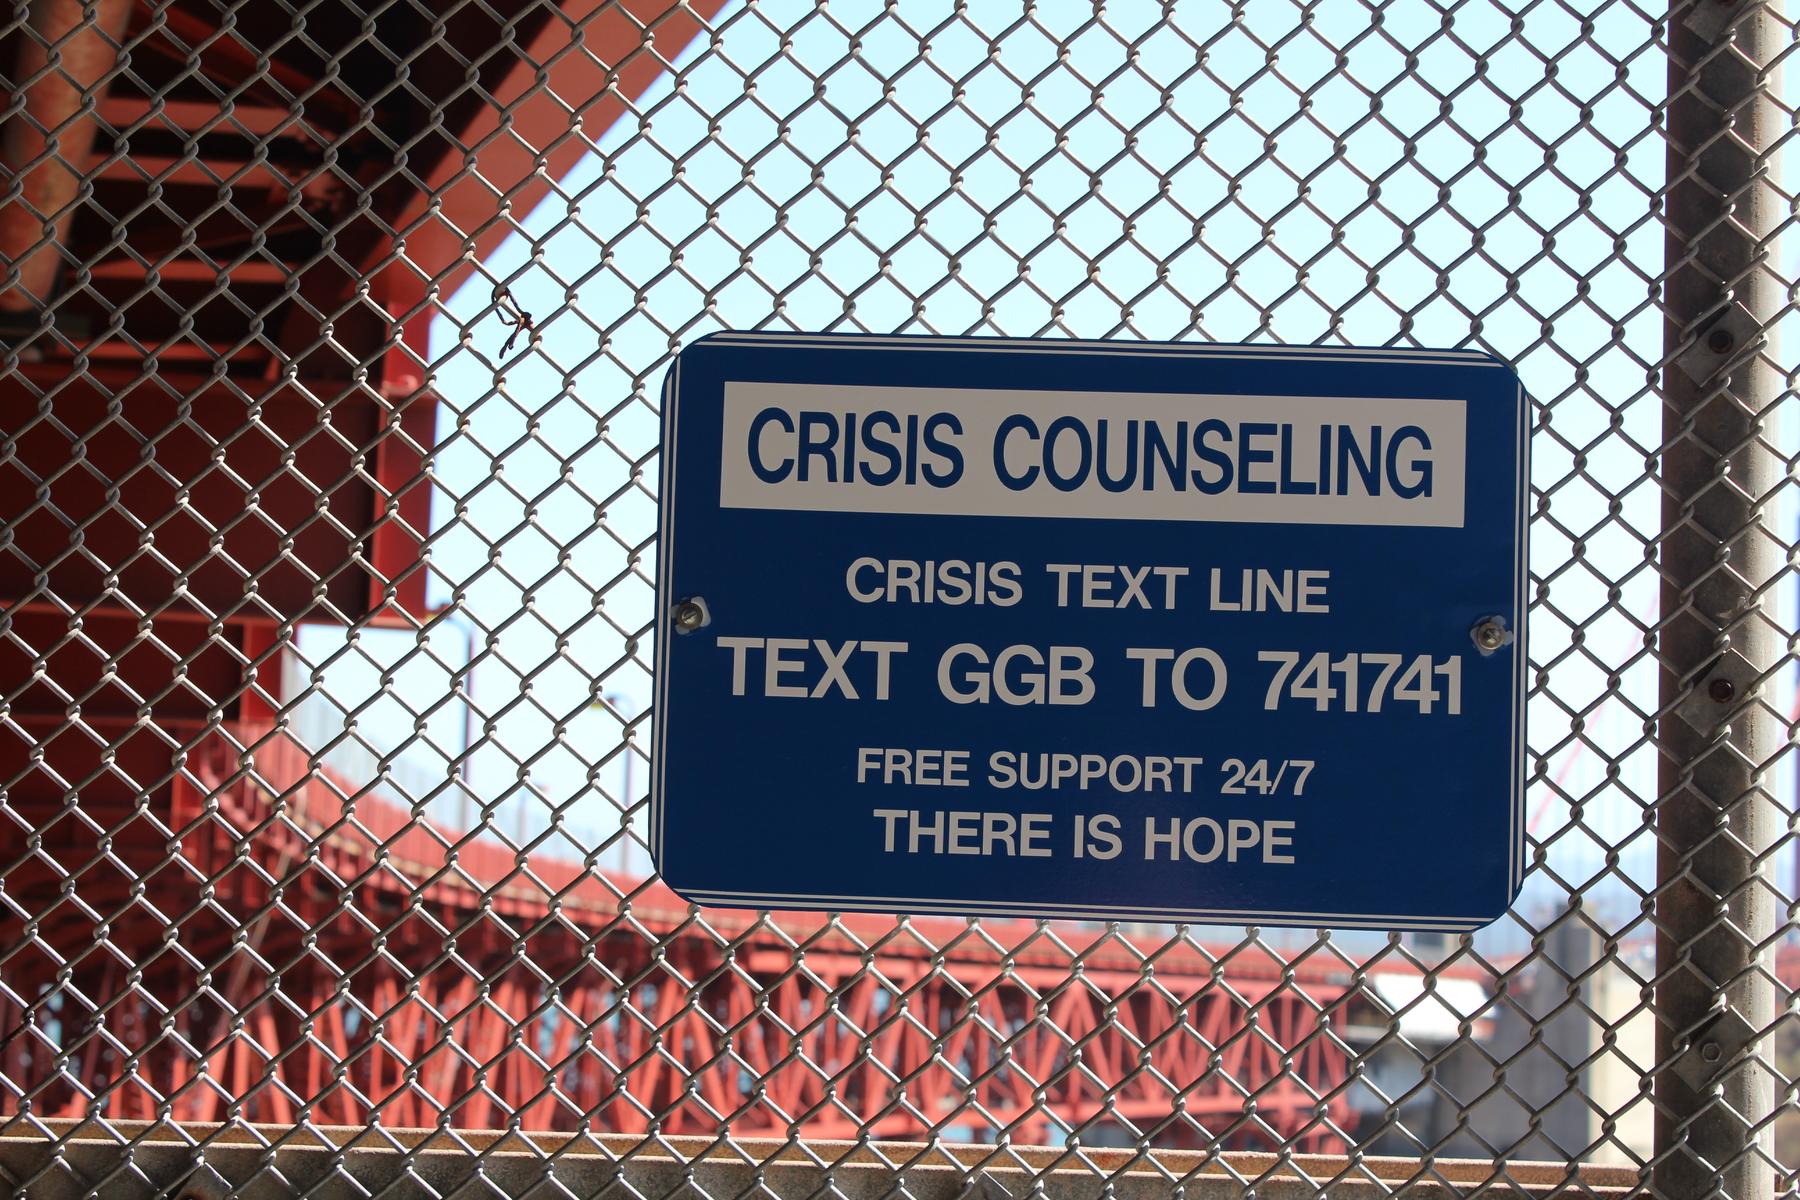 a sign on a fence - File:Crisis Counseling at Golden Gate Bridge.jpg